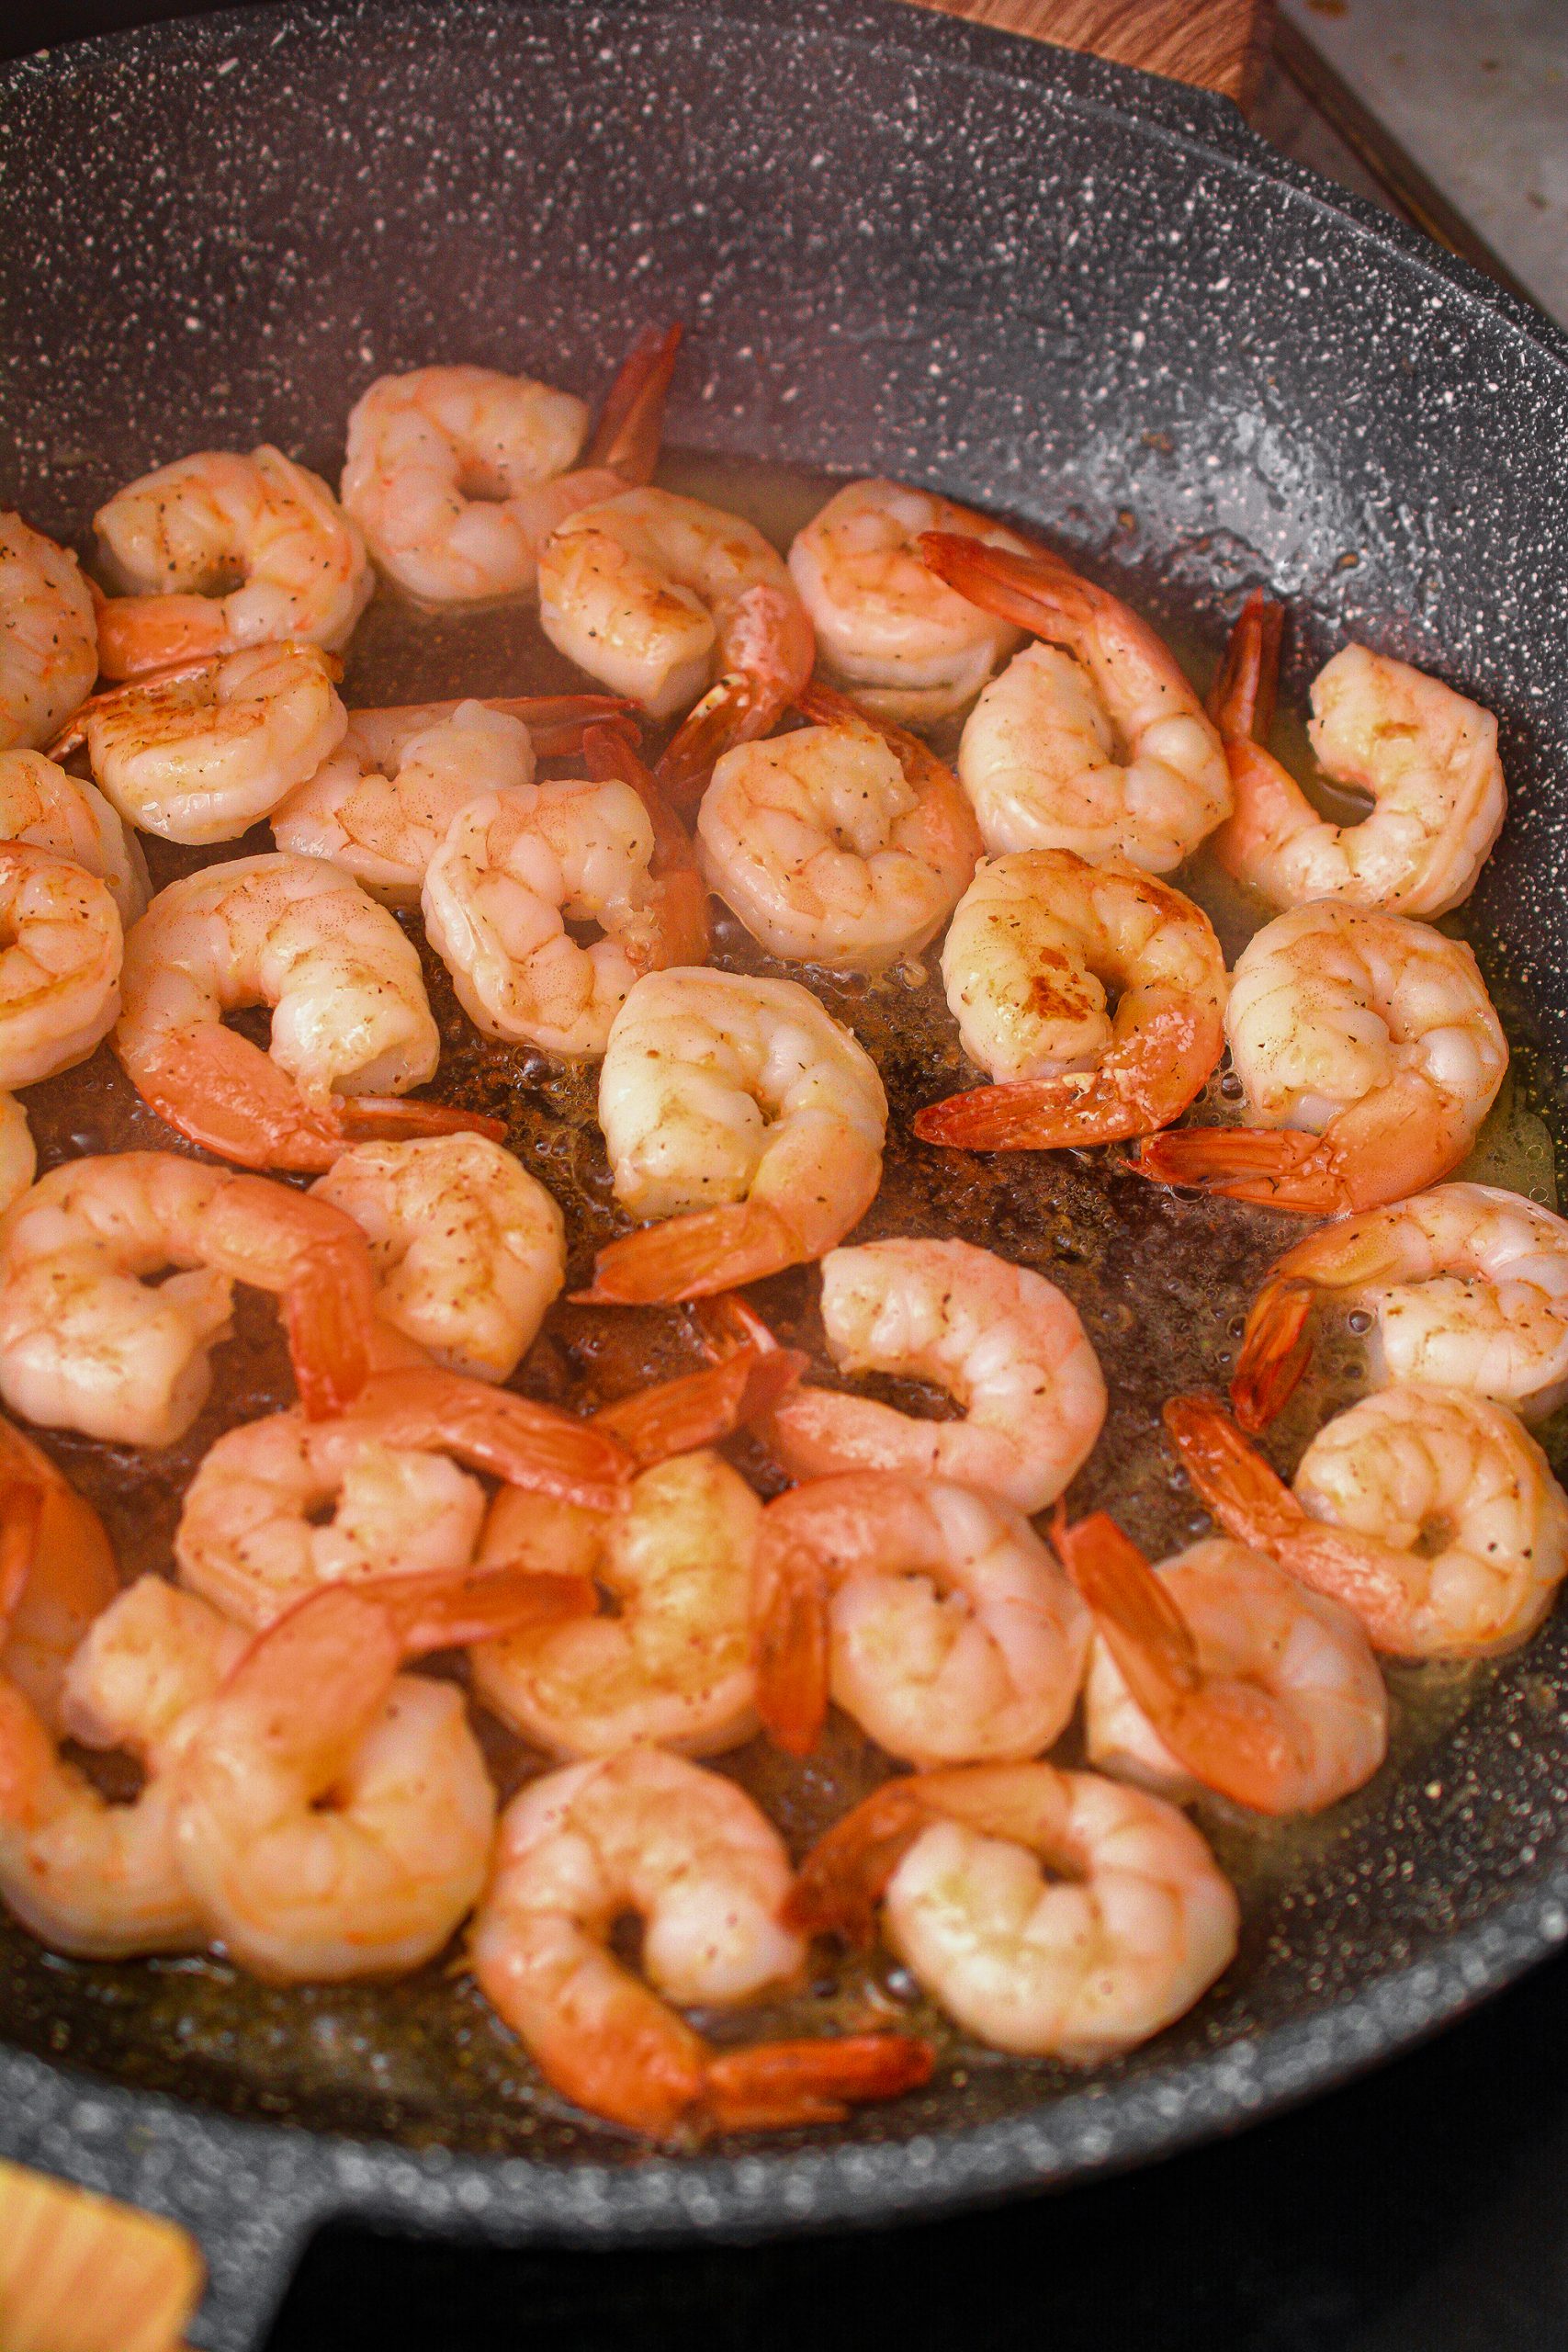 Season the shrimp with salt and pepper to taste, and add to a skillet over medium high heat